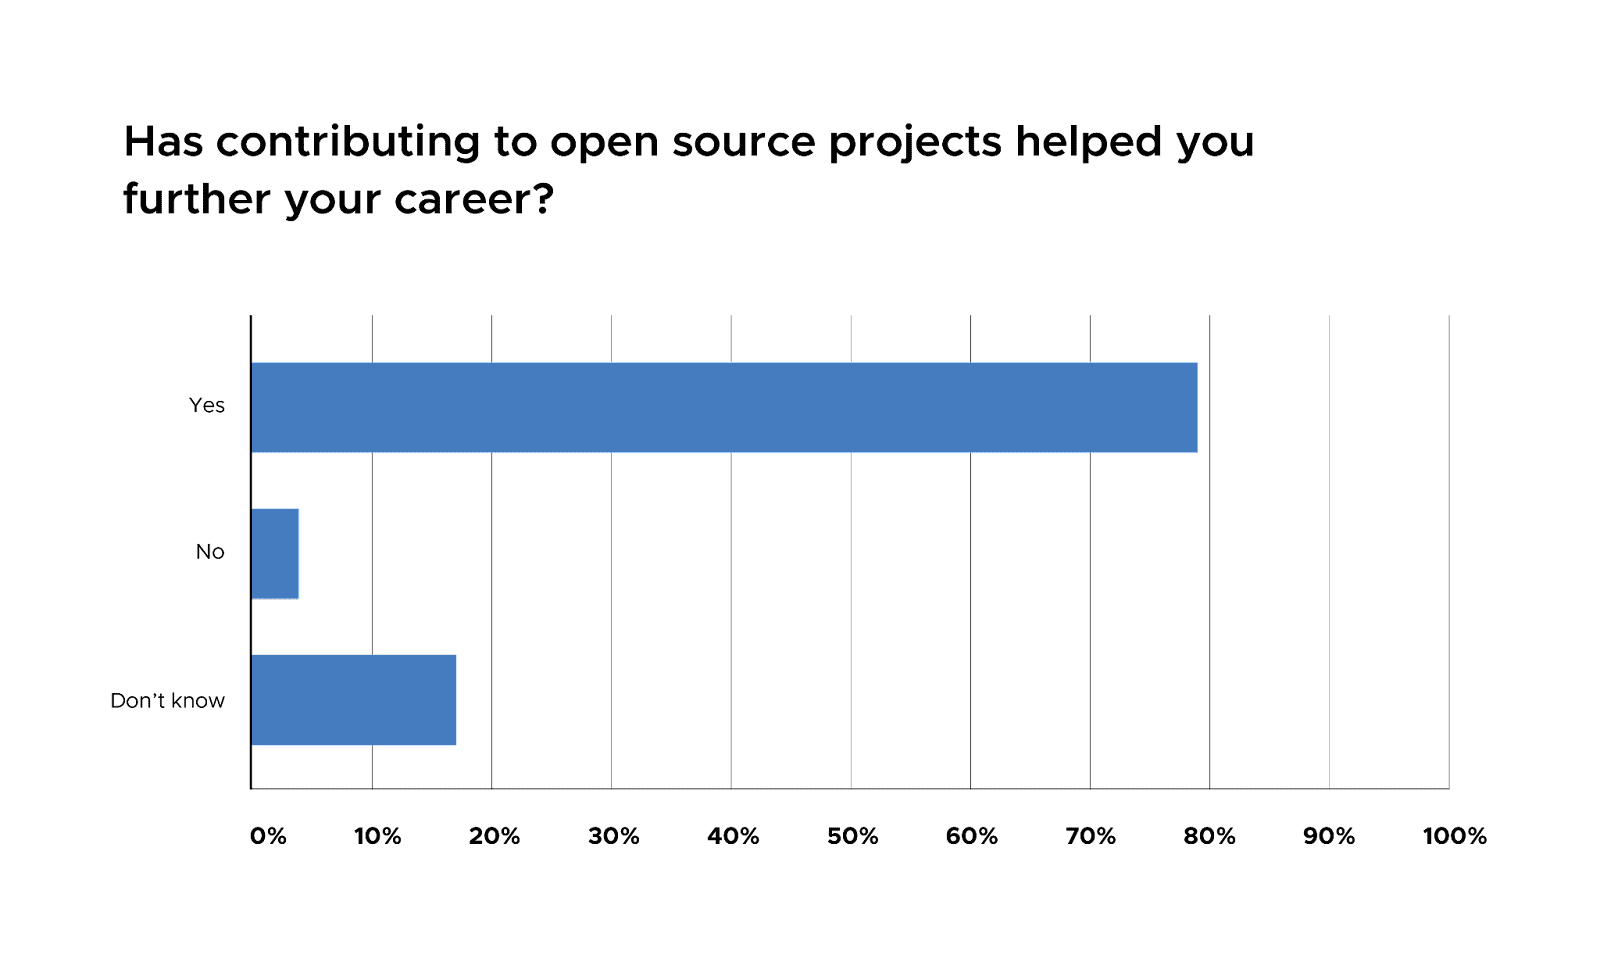 Bar chart showing 78% of the respondents voted yes to "Has contributing to open source projects helped you further your career?"